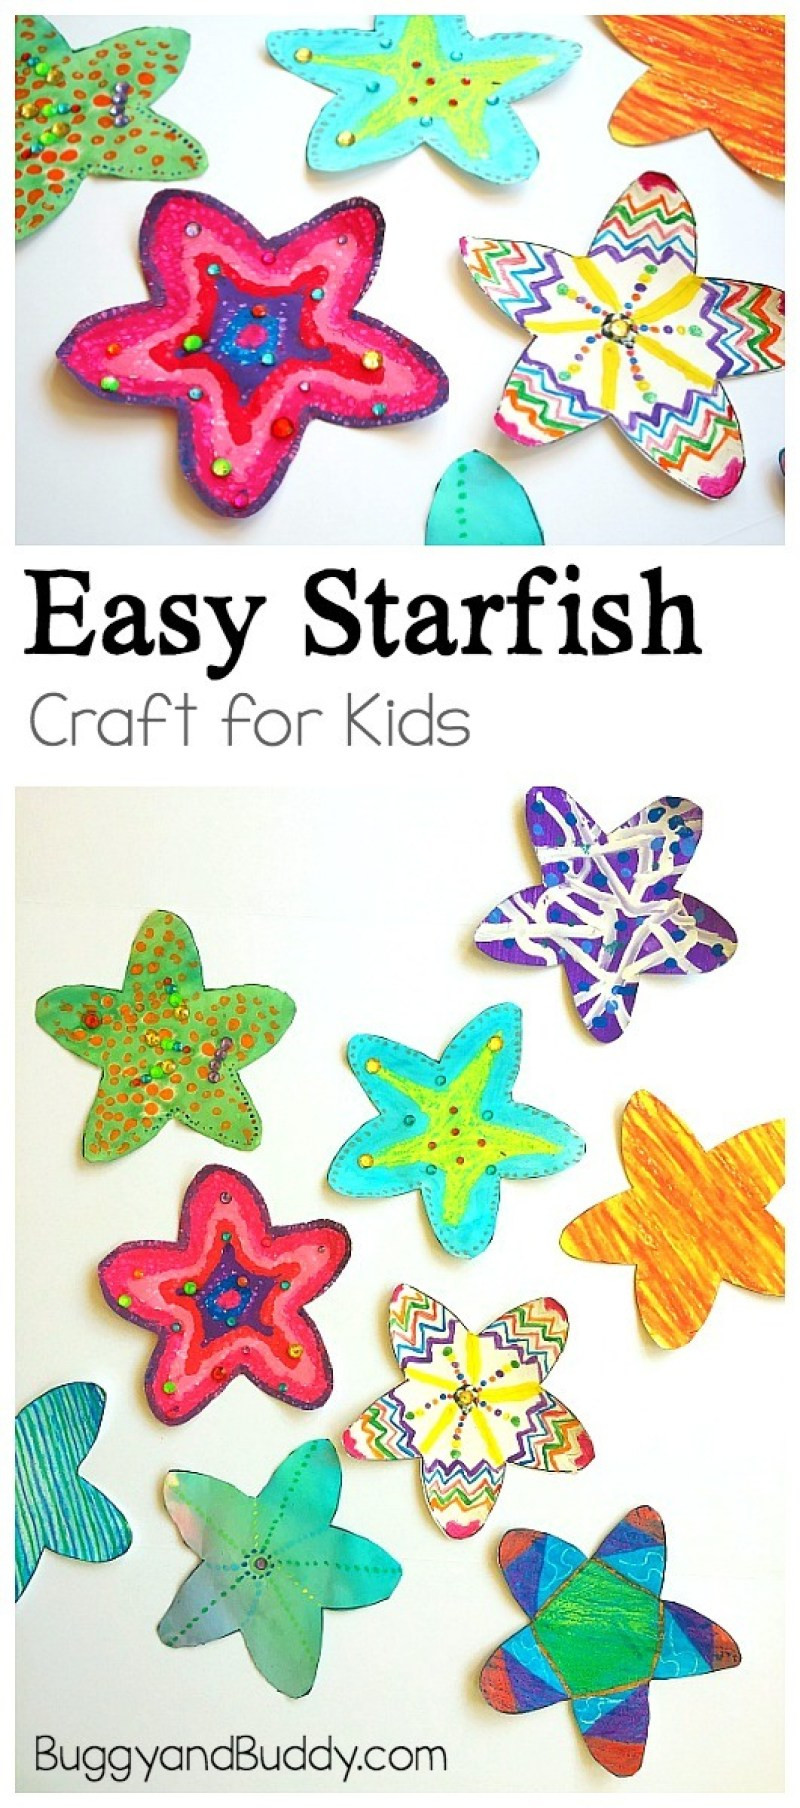 Easy Toddler Crafts
 12 Favorite Easy Summer Crafts for Kids on Love the Day